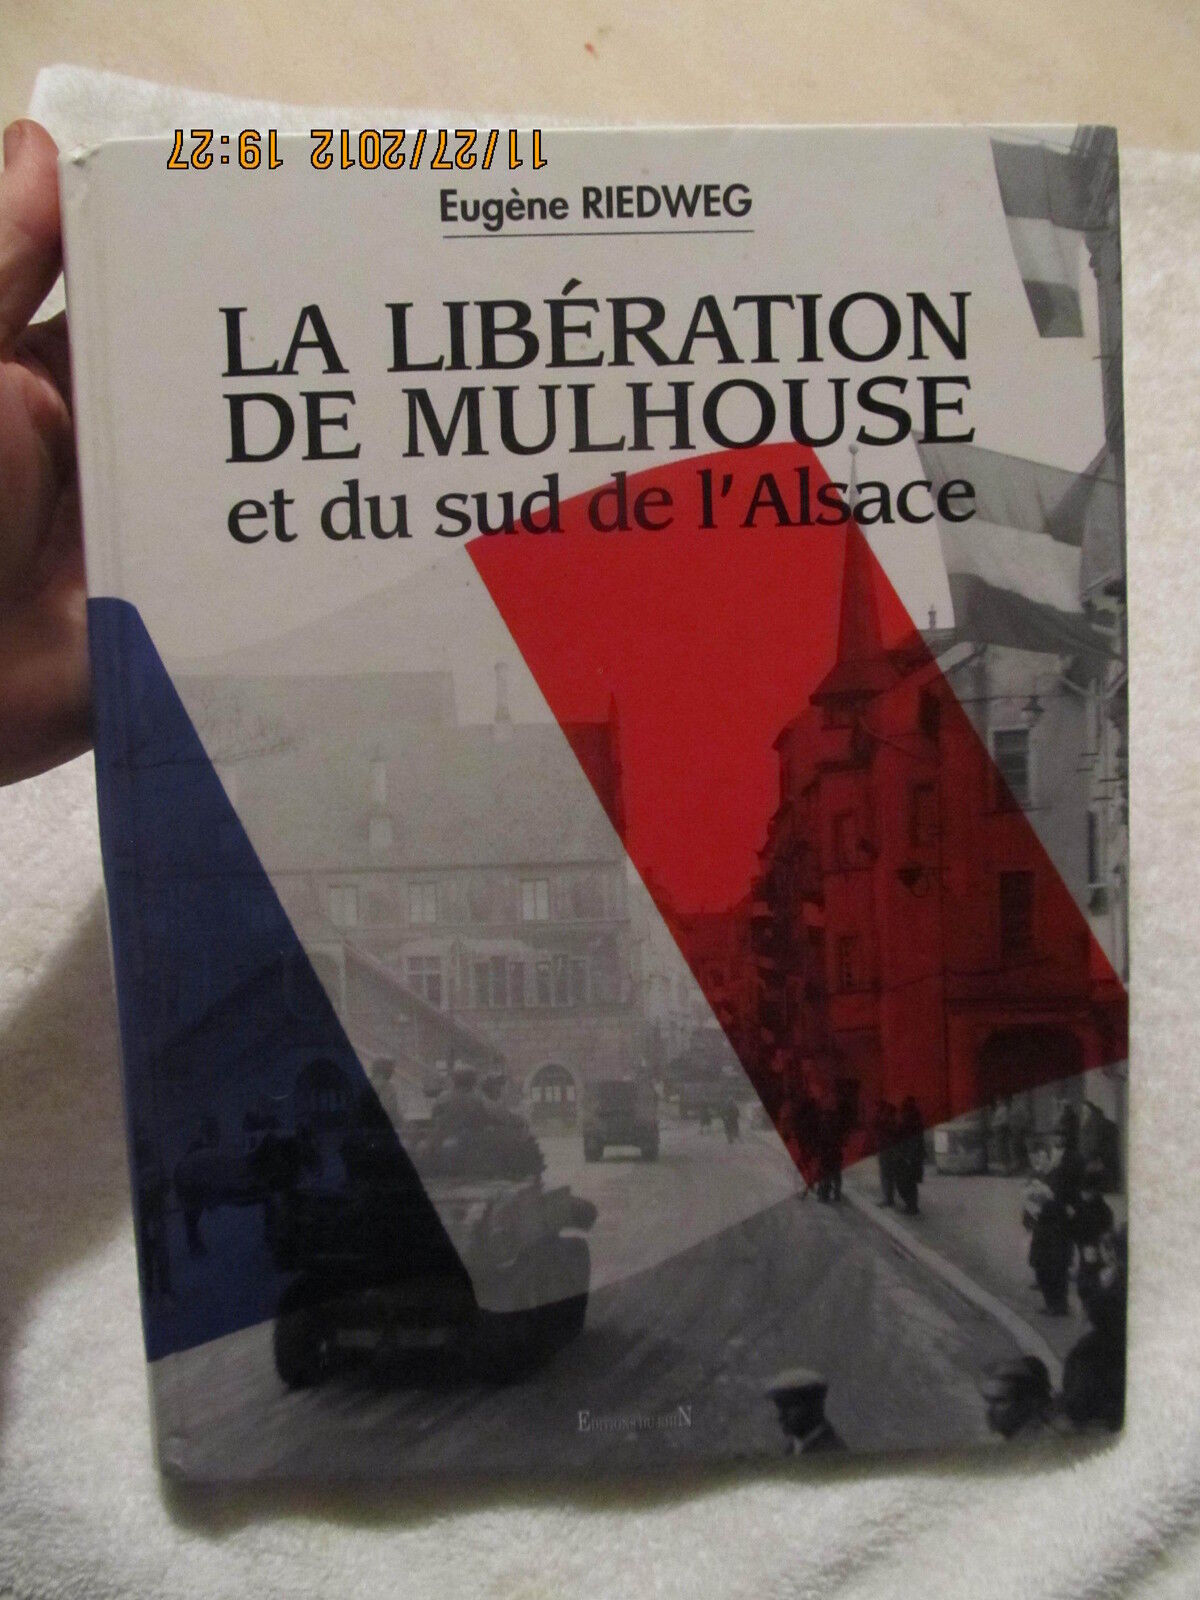 Vintage Book Release of Mulhouse and Southern Alsace 1944-1945 Written In French